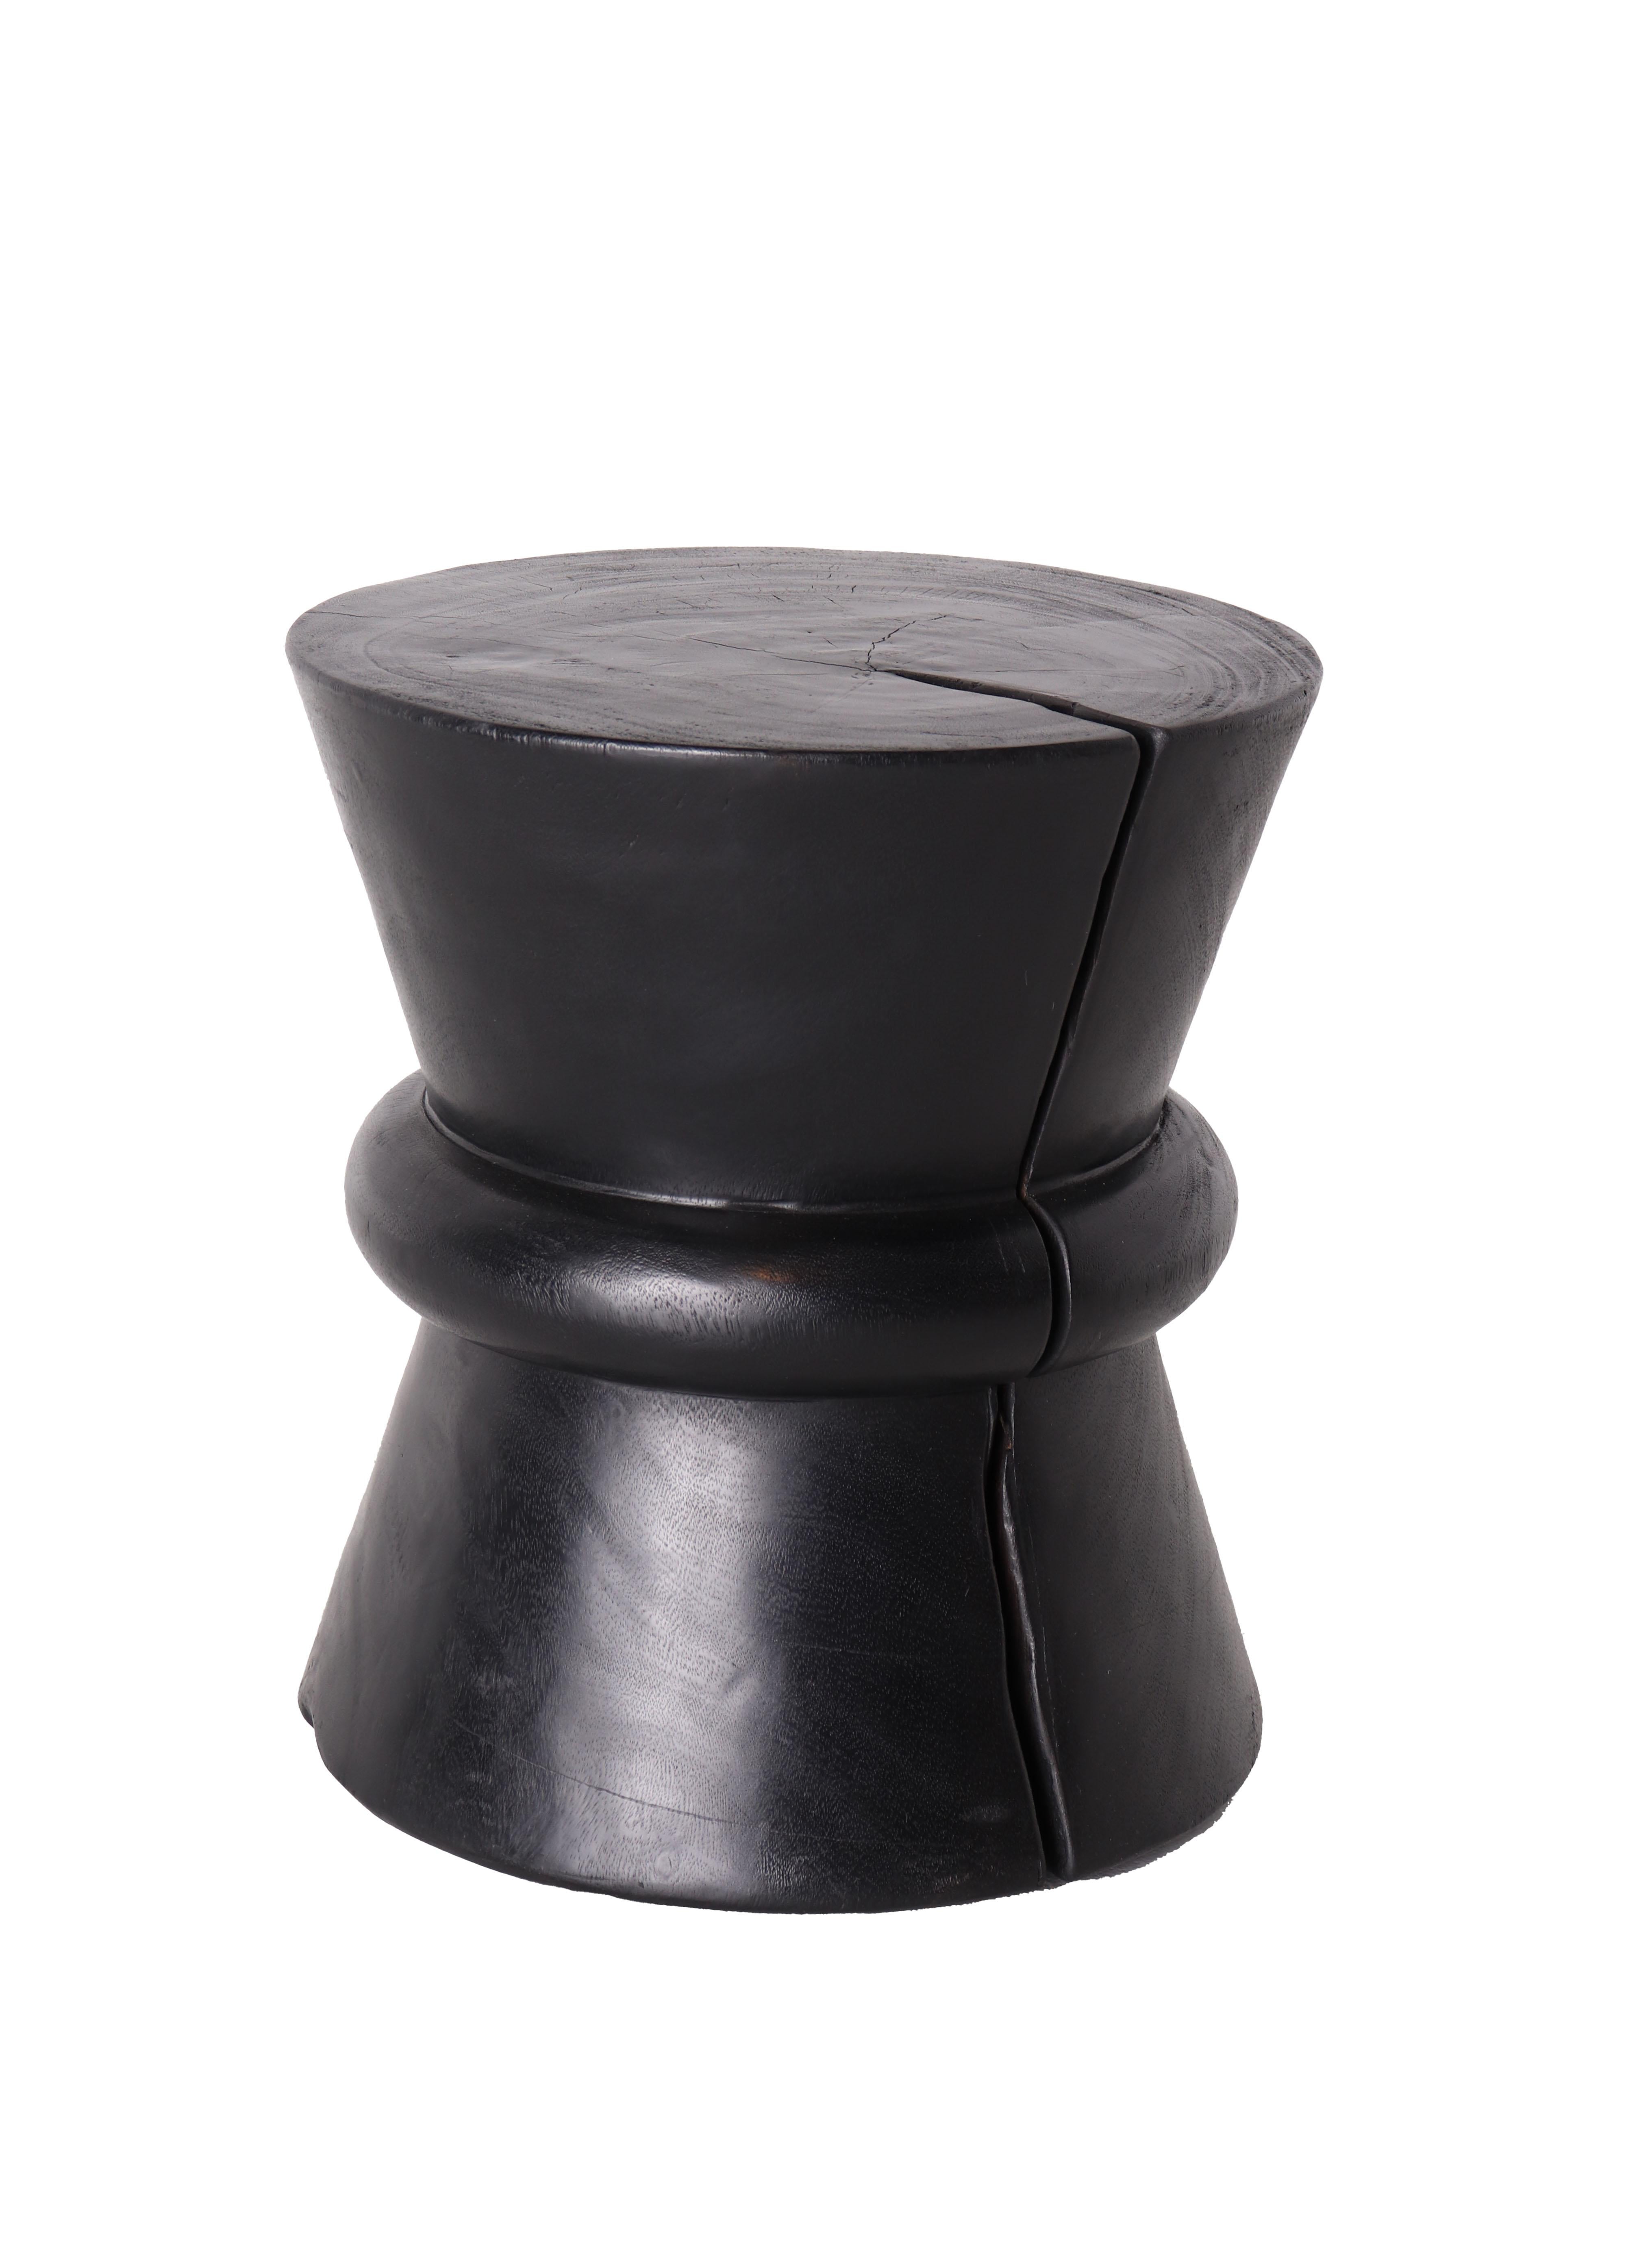 Conical end table in ebonized teak

Sourced from Europe by Brendan Bass. 
Available on the showroom floor, new.